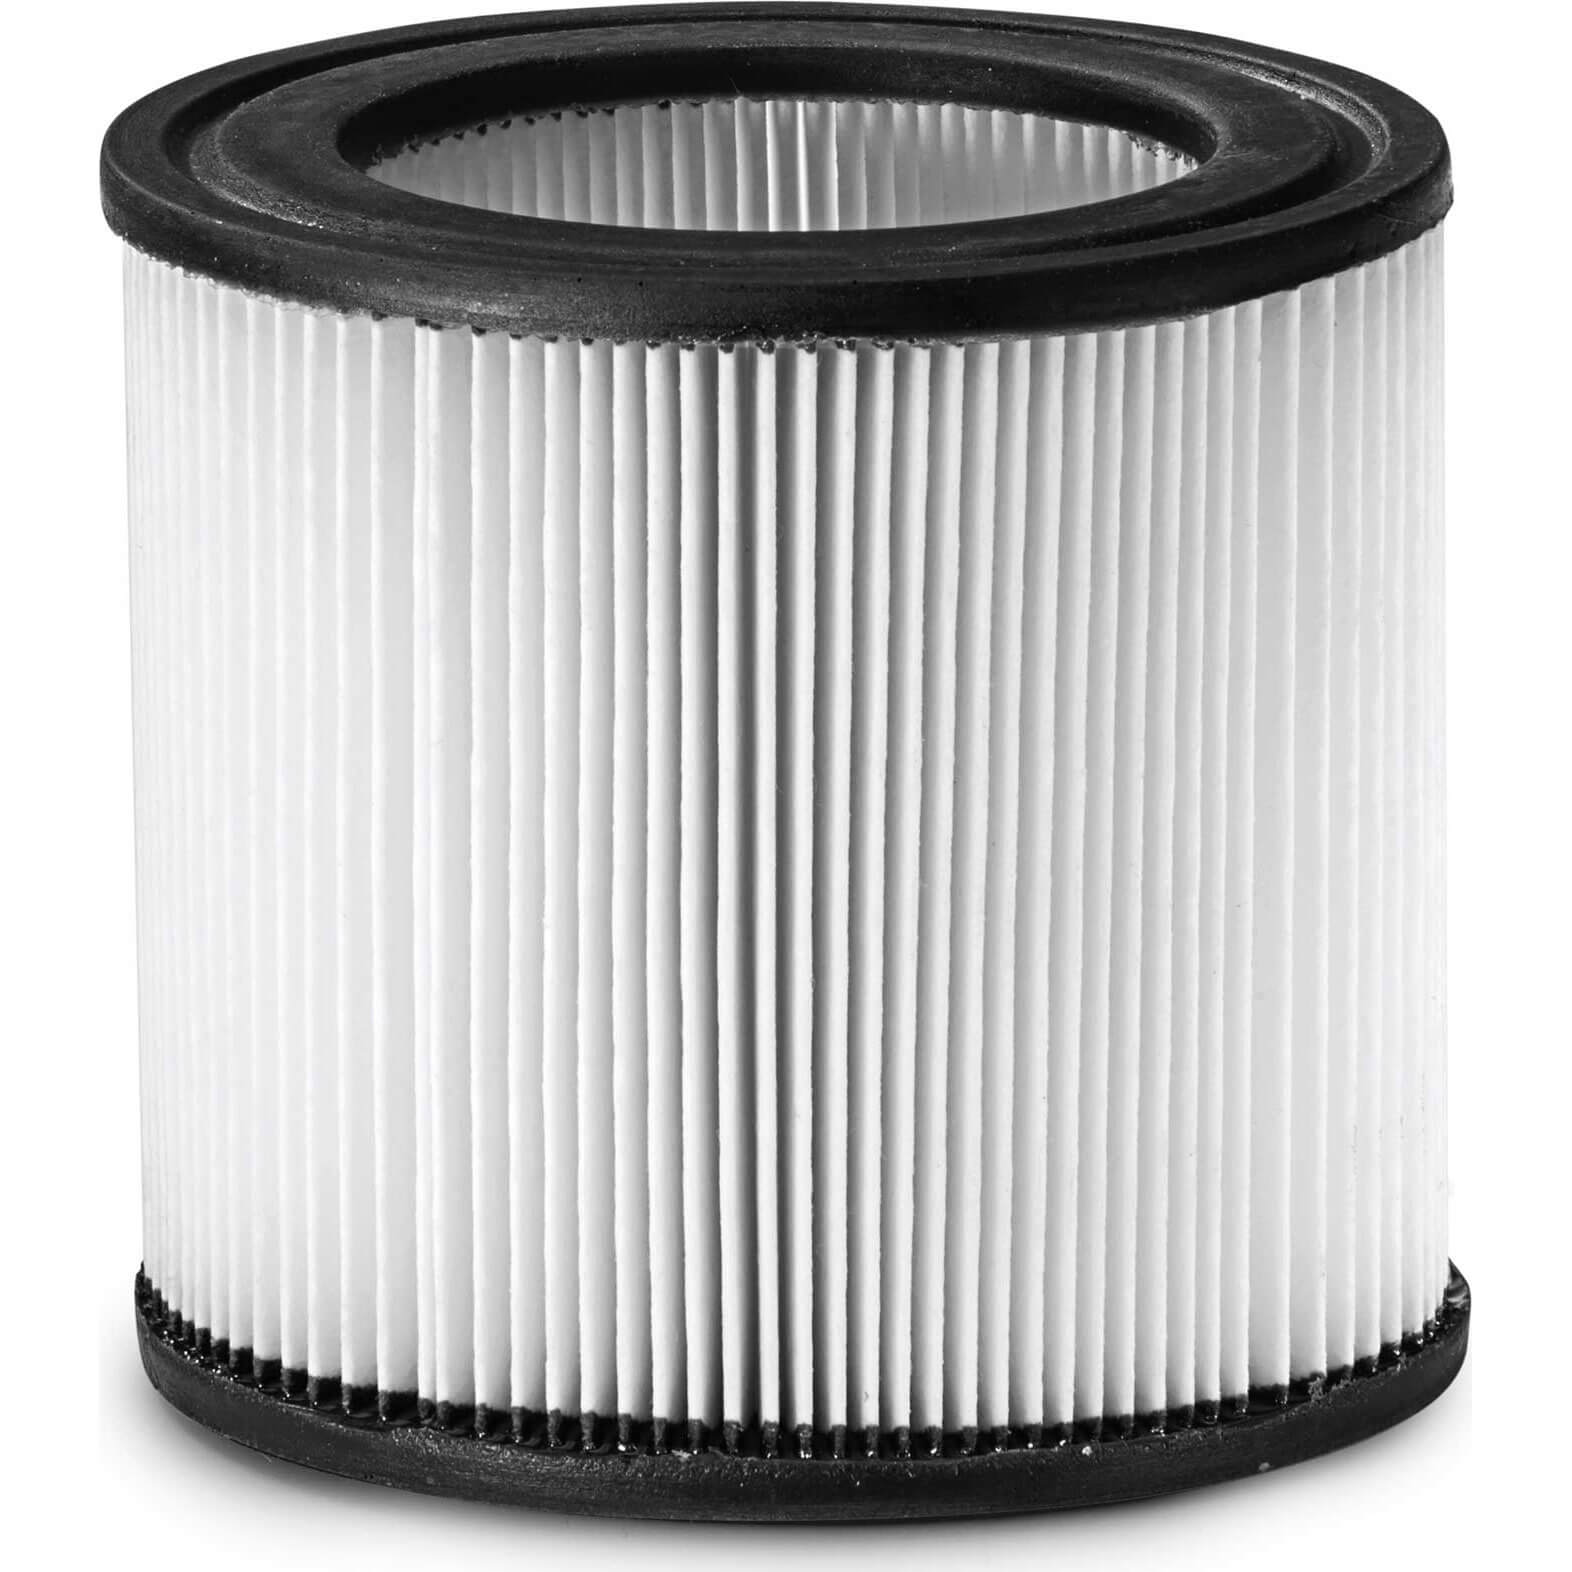 Photo of Karcher Cartridge Filter Pes For Nt 22/1 Vacuum Cleaners Pack Of 1